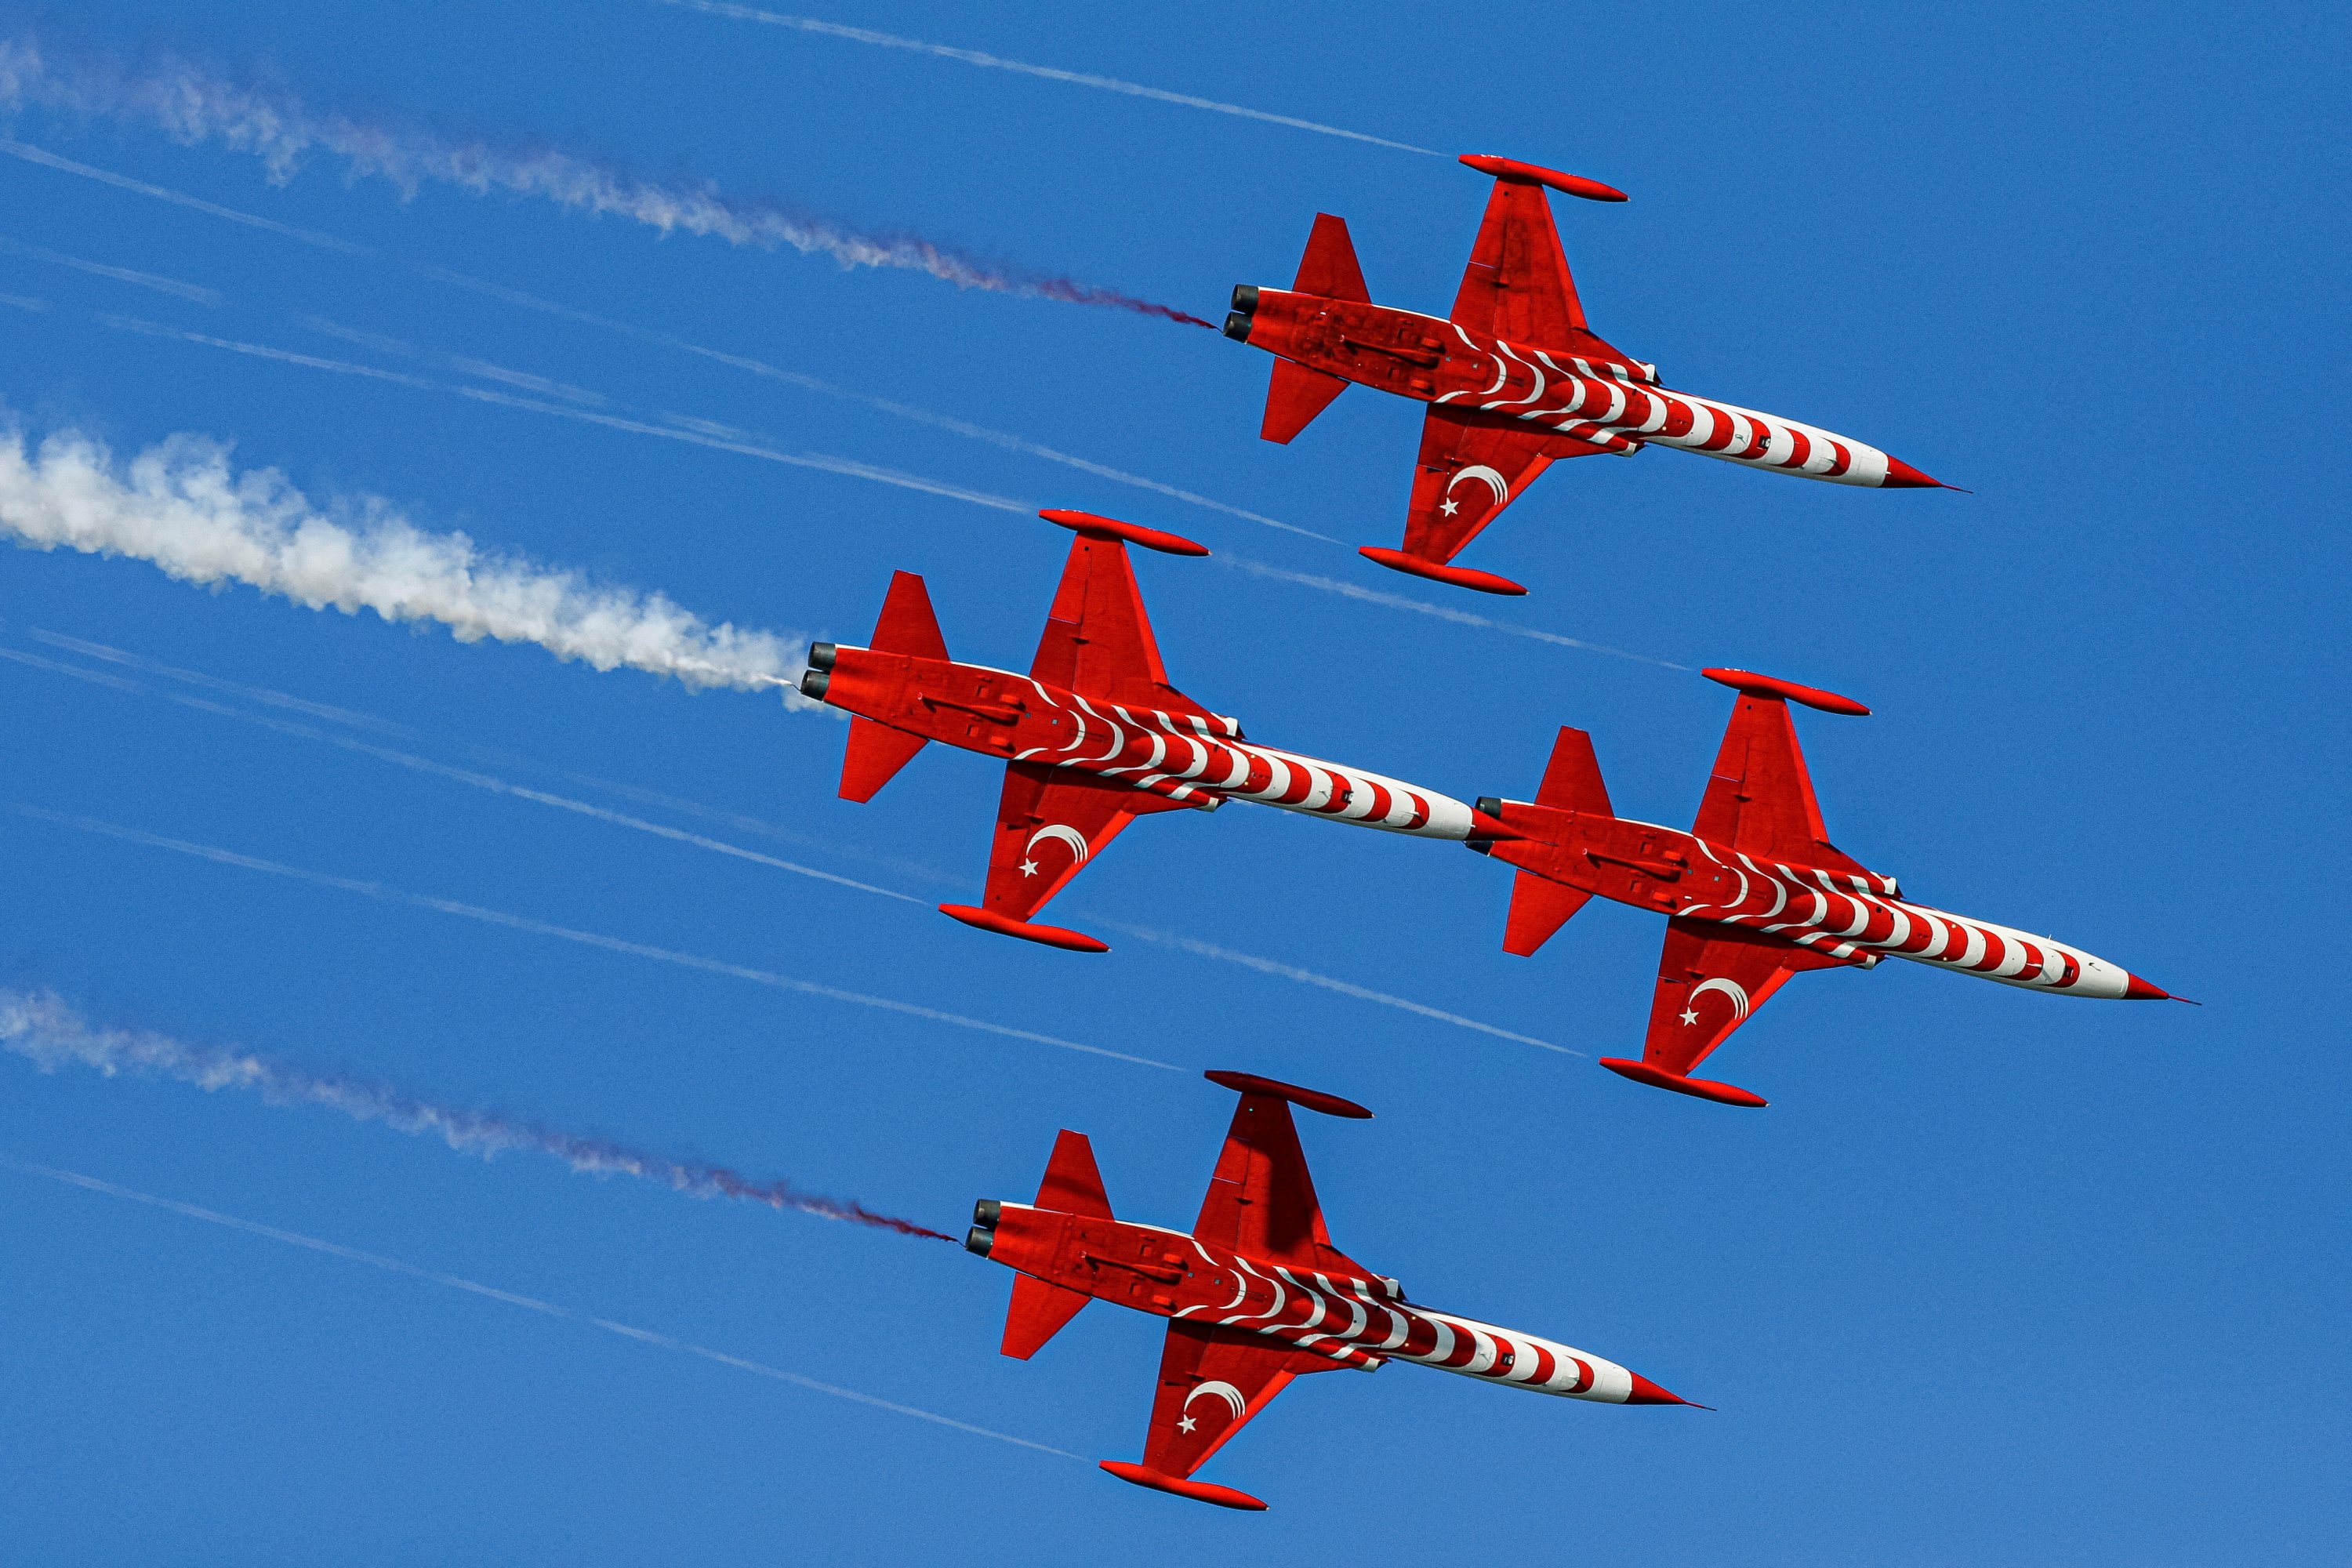 The aerobatic team Turkish Stars performs during a demonstration flight at the Teknofest aerospace and technology festival in Baku, Azerbaijan, May 27, 2022. (Reuters Photo)